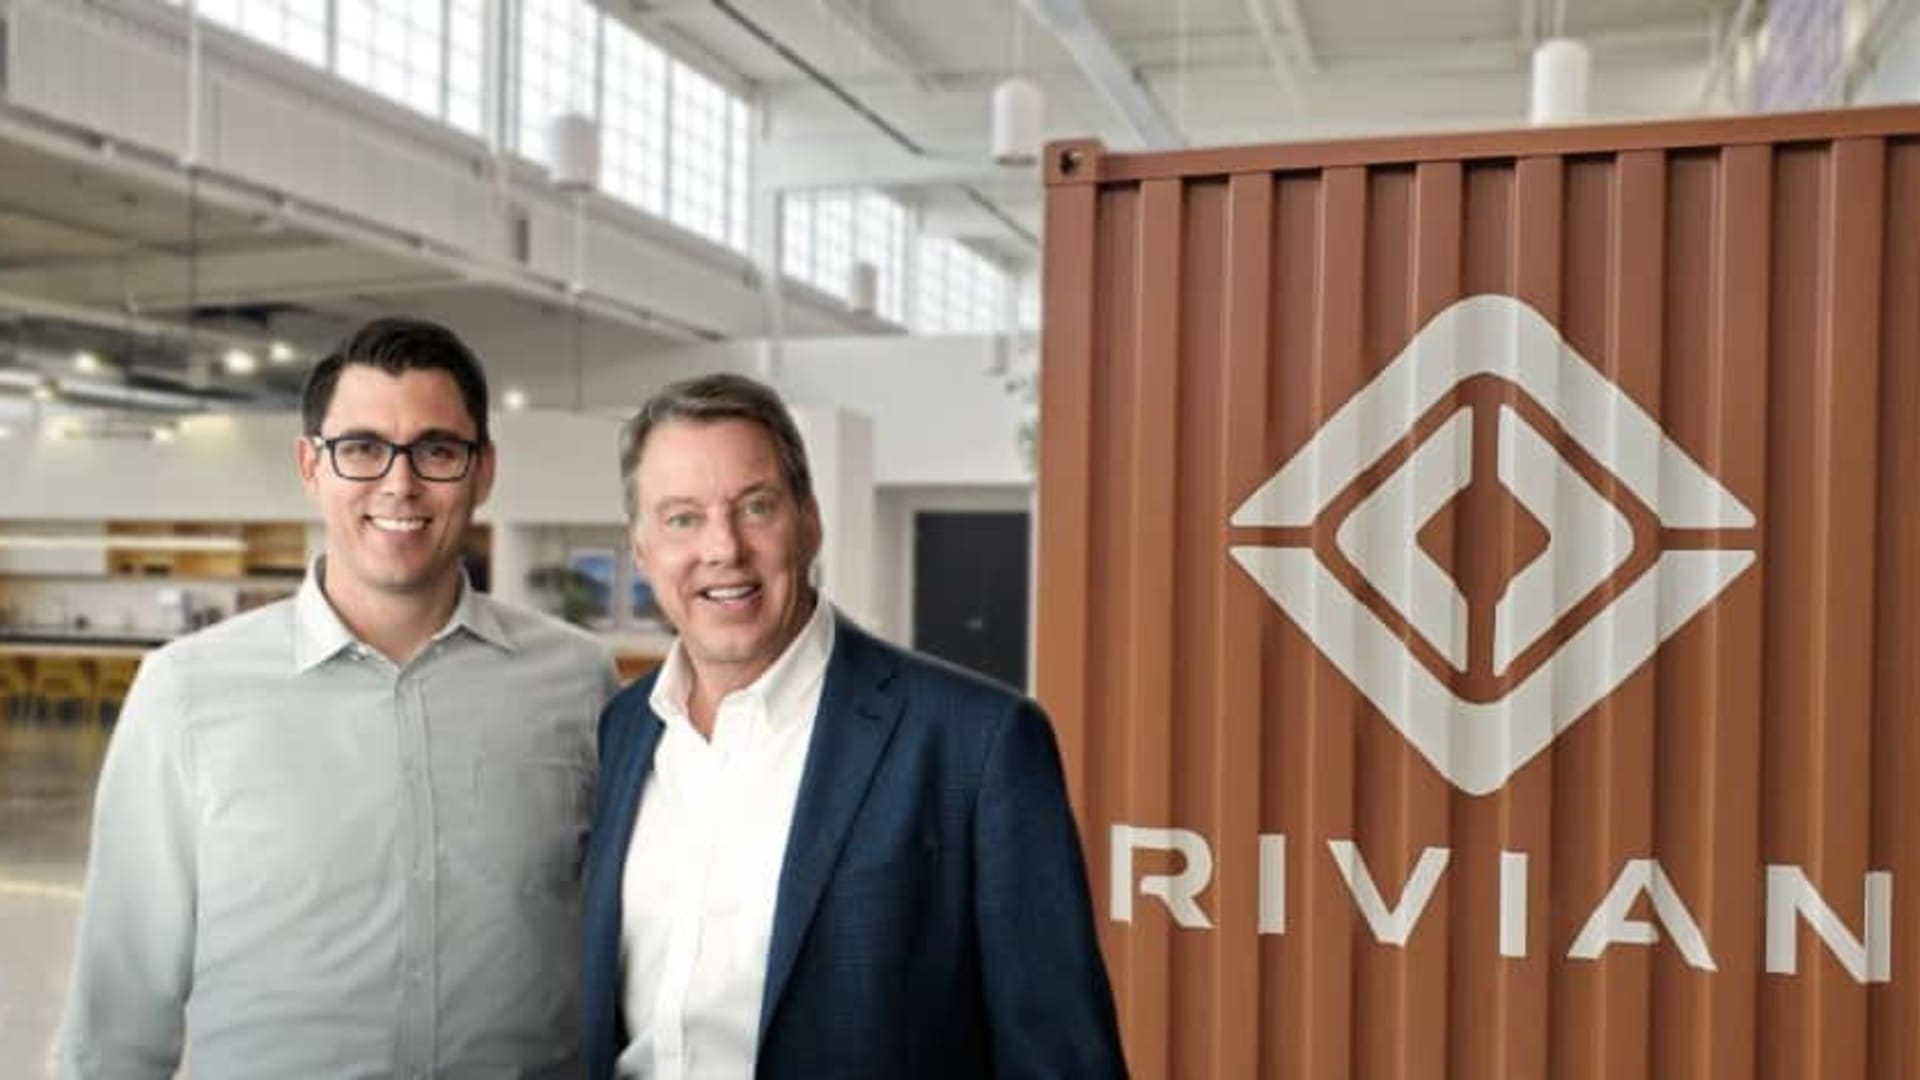 RJ Scaringe, Rivian founder and CEO, and Ford Executive Chairman Bill Ford announce a $500 million Ford investment in Rivian.